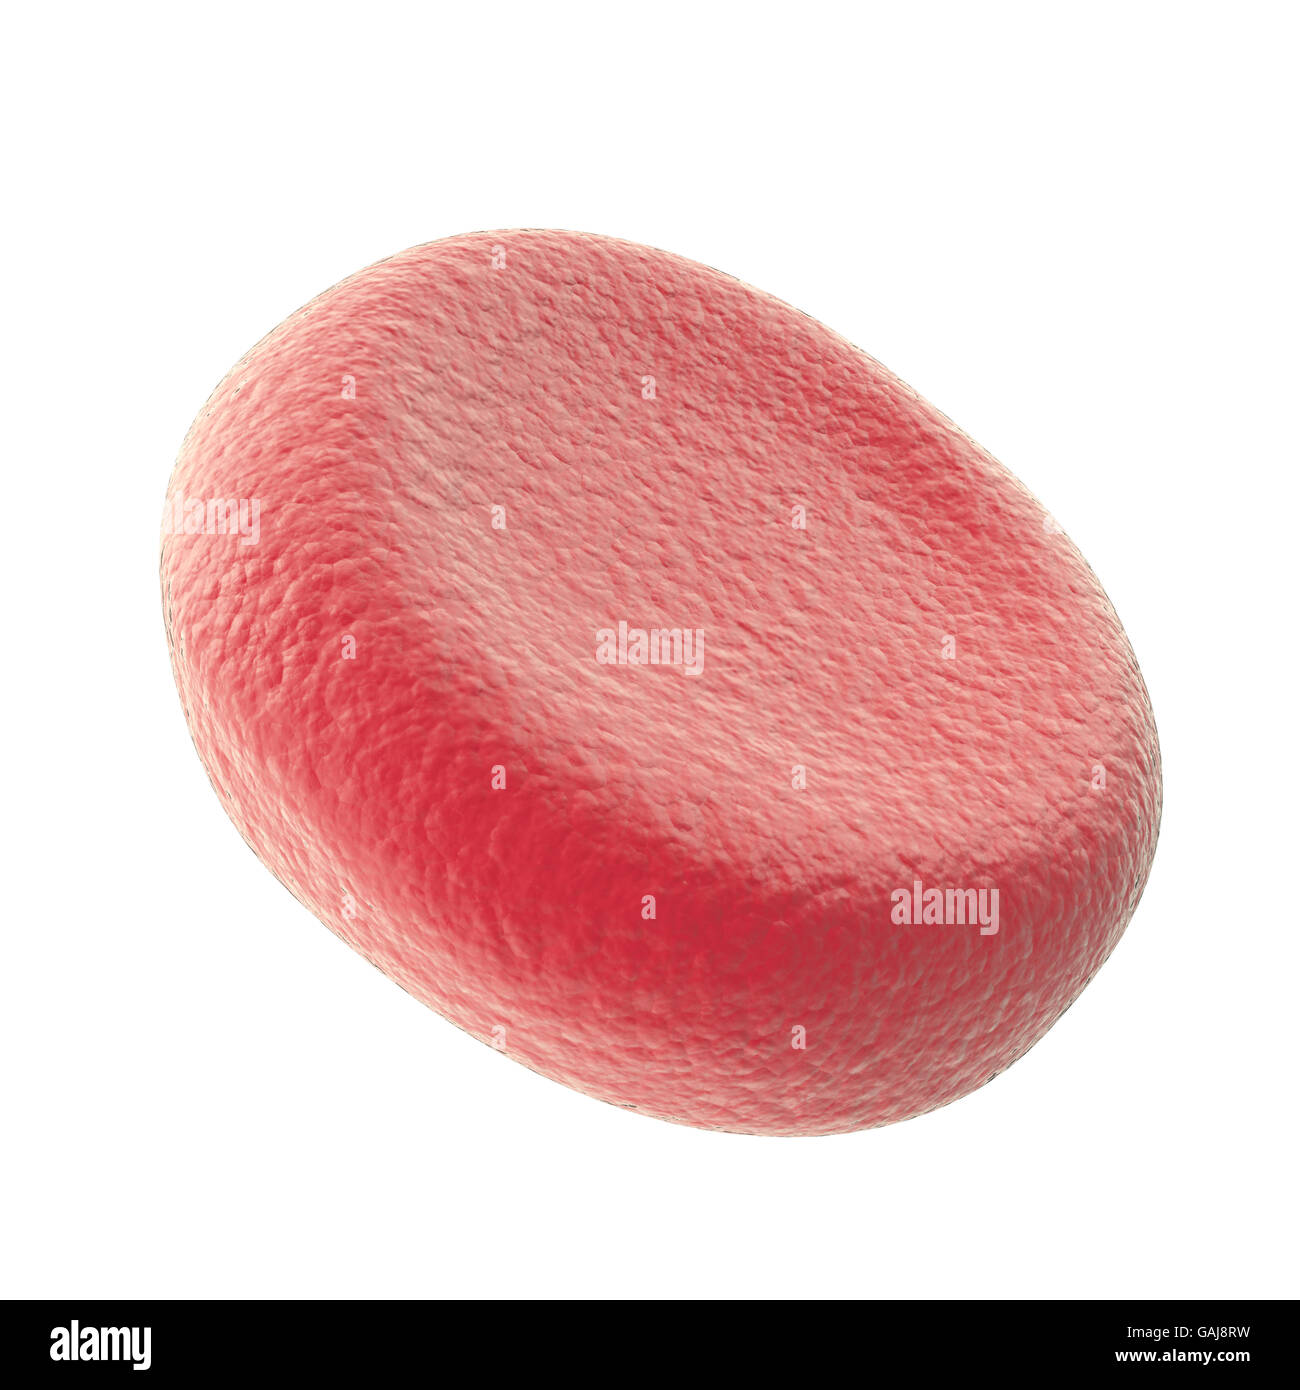 Single red blood cell isolated on white background. 3d illustration high quality Stock Photo